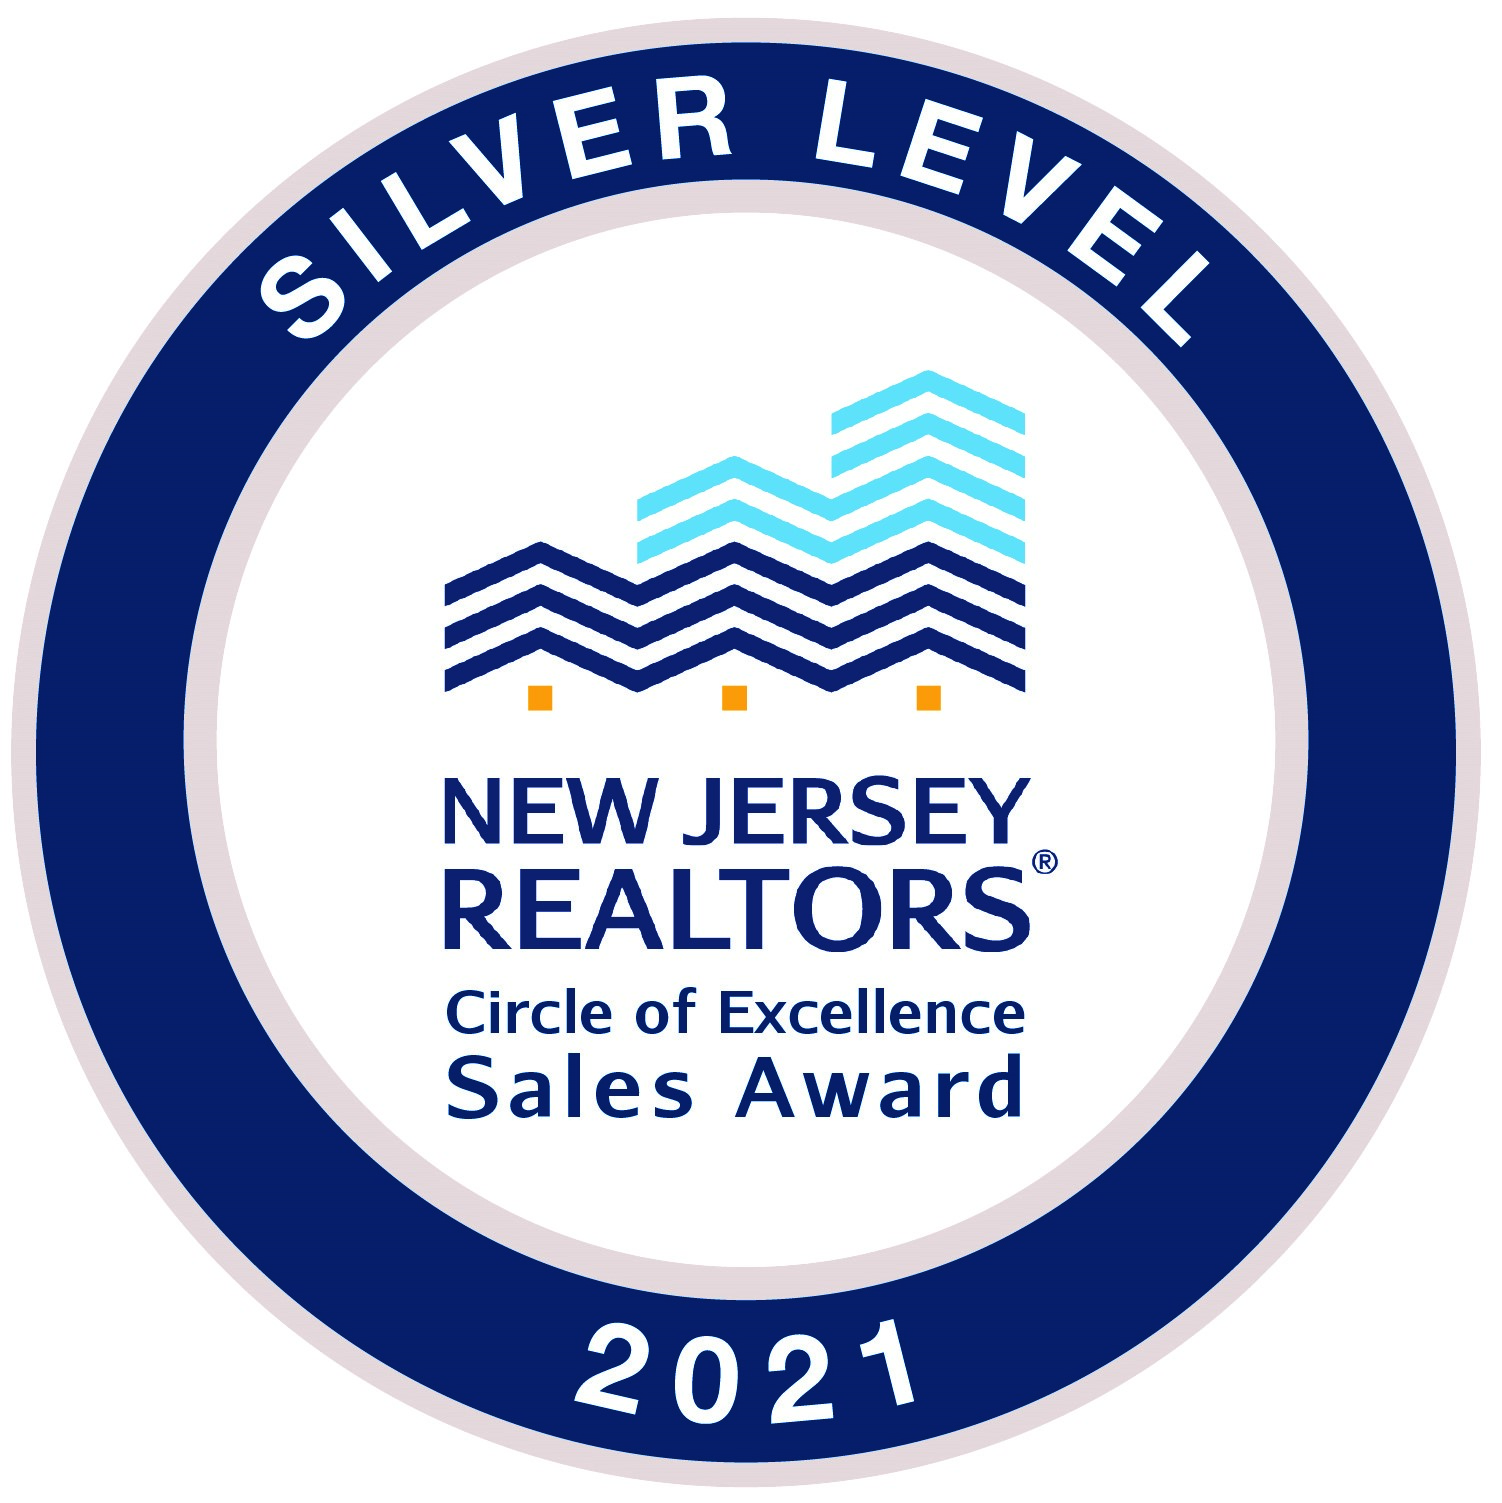 A text banner describing a sales award for New Jersey in 2021.